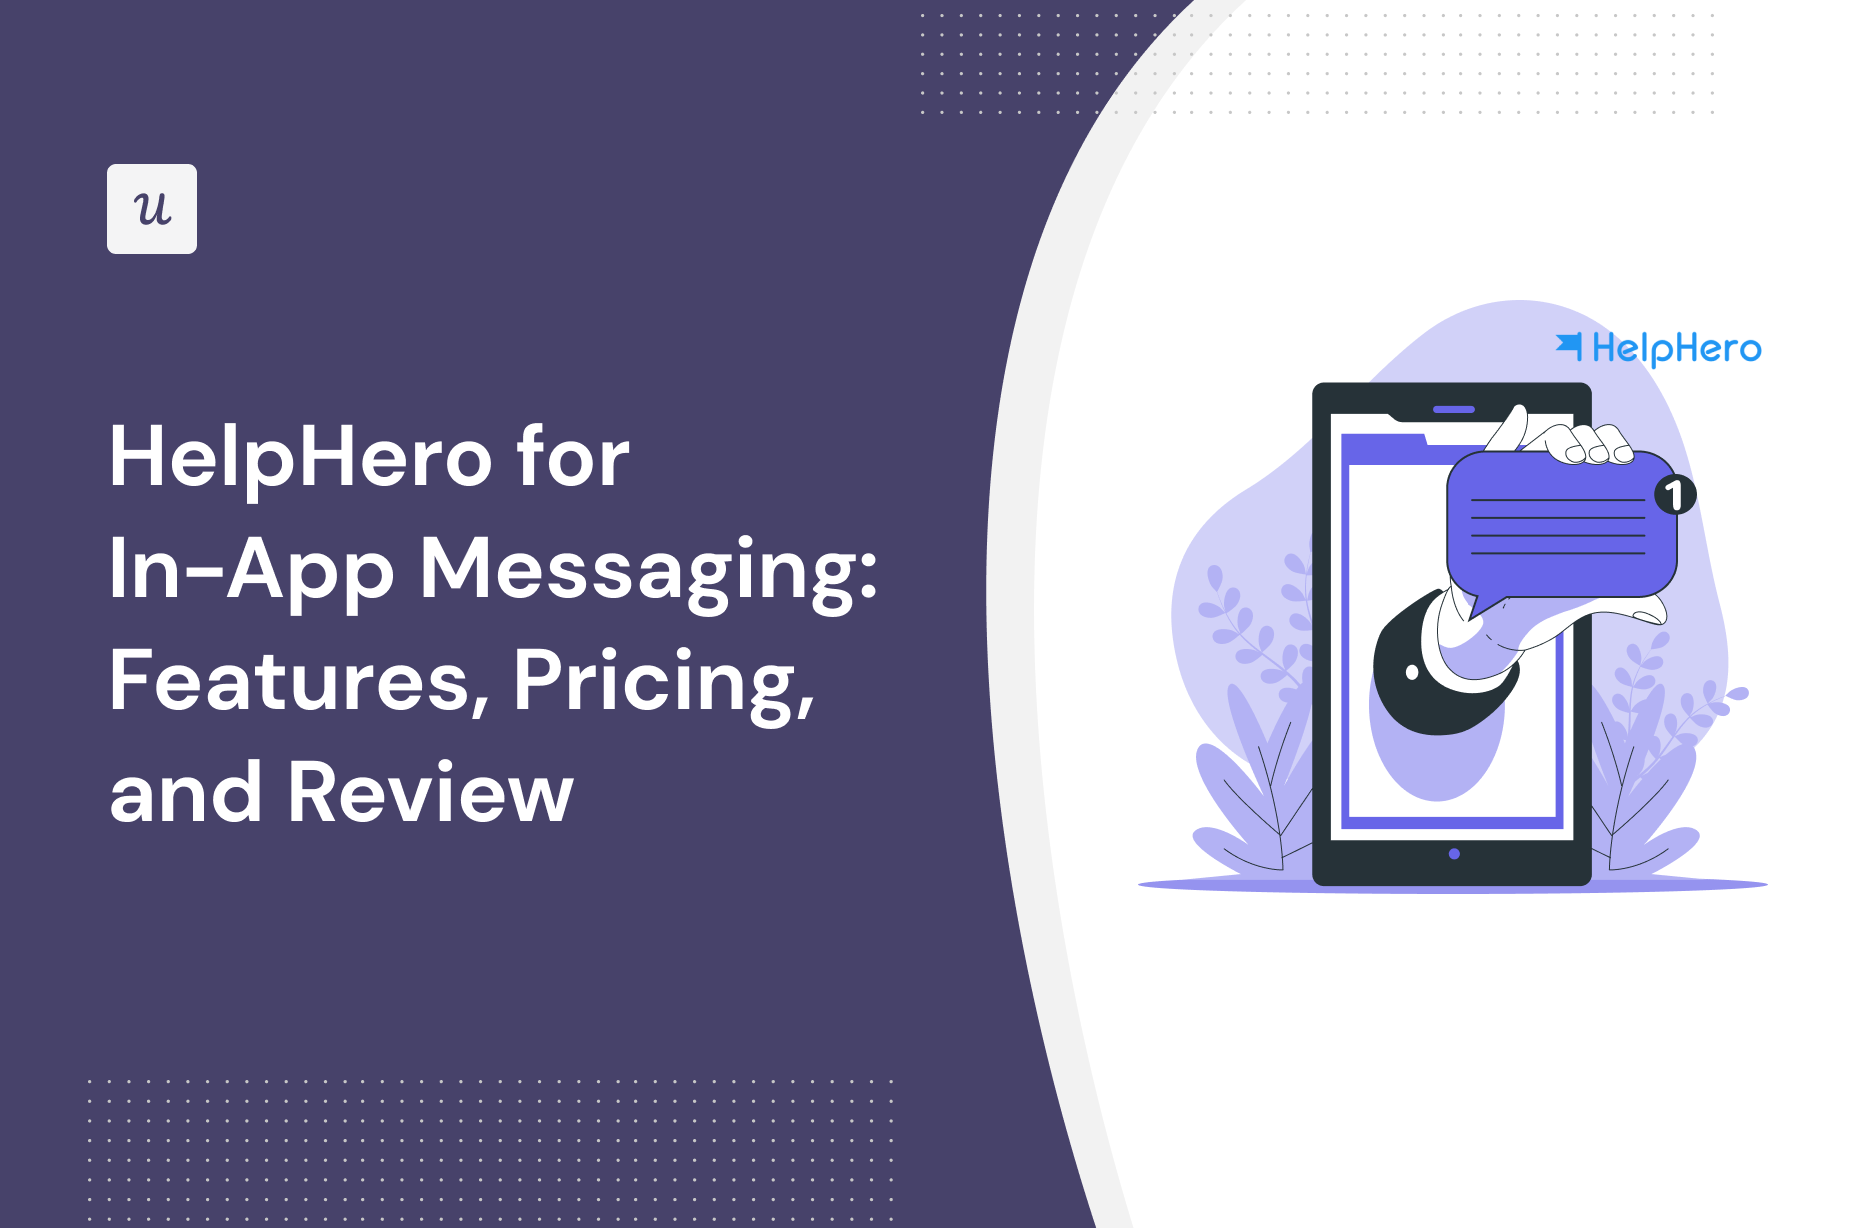 HelpHero for In-App Messaging: Features, Pricing, and Review